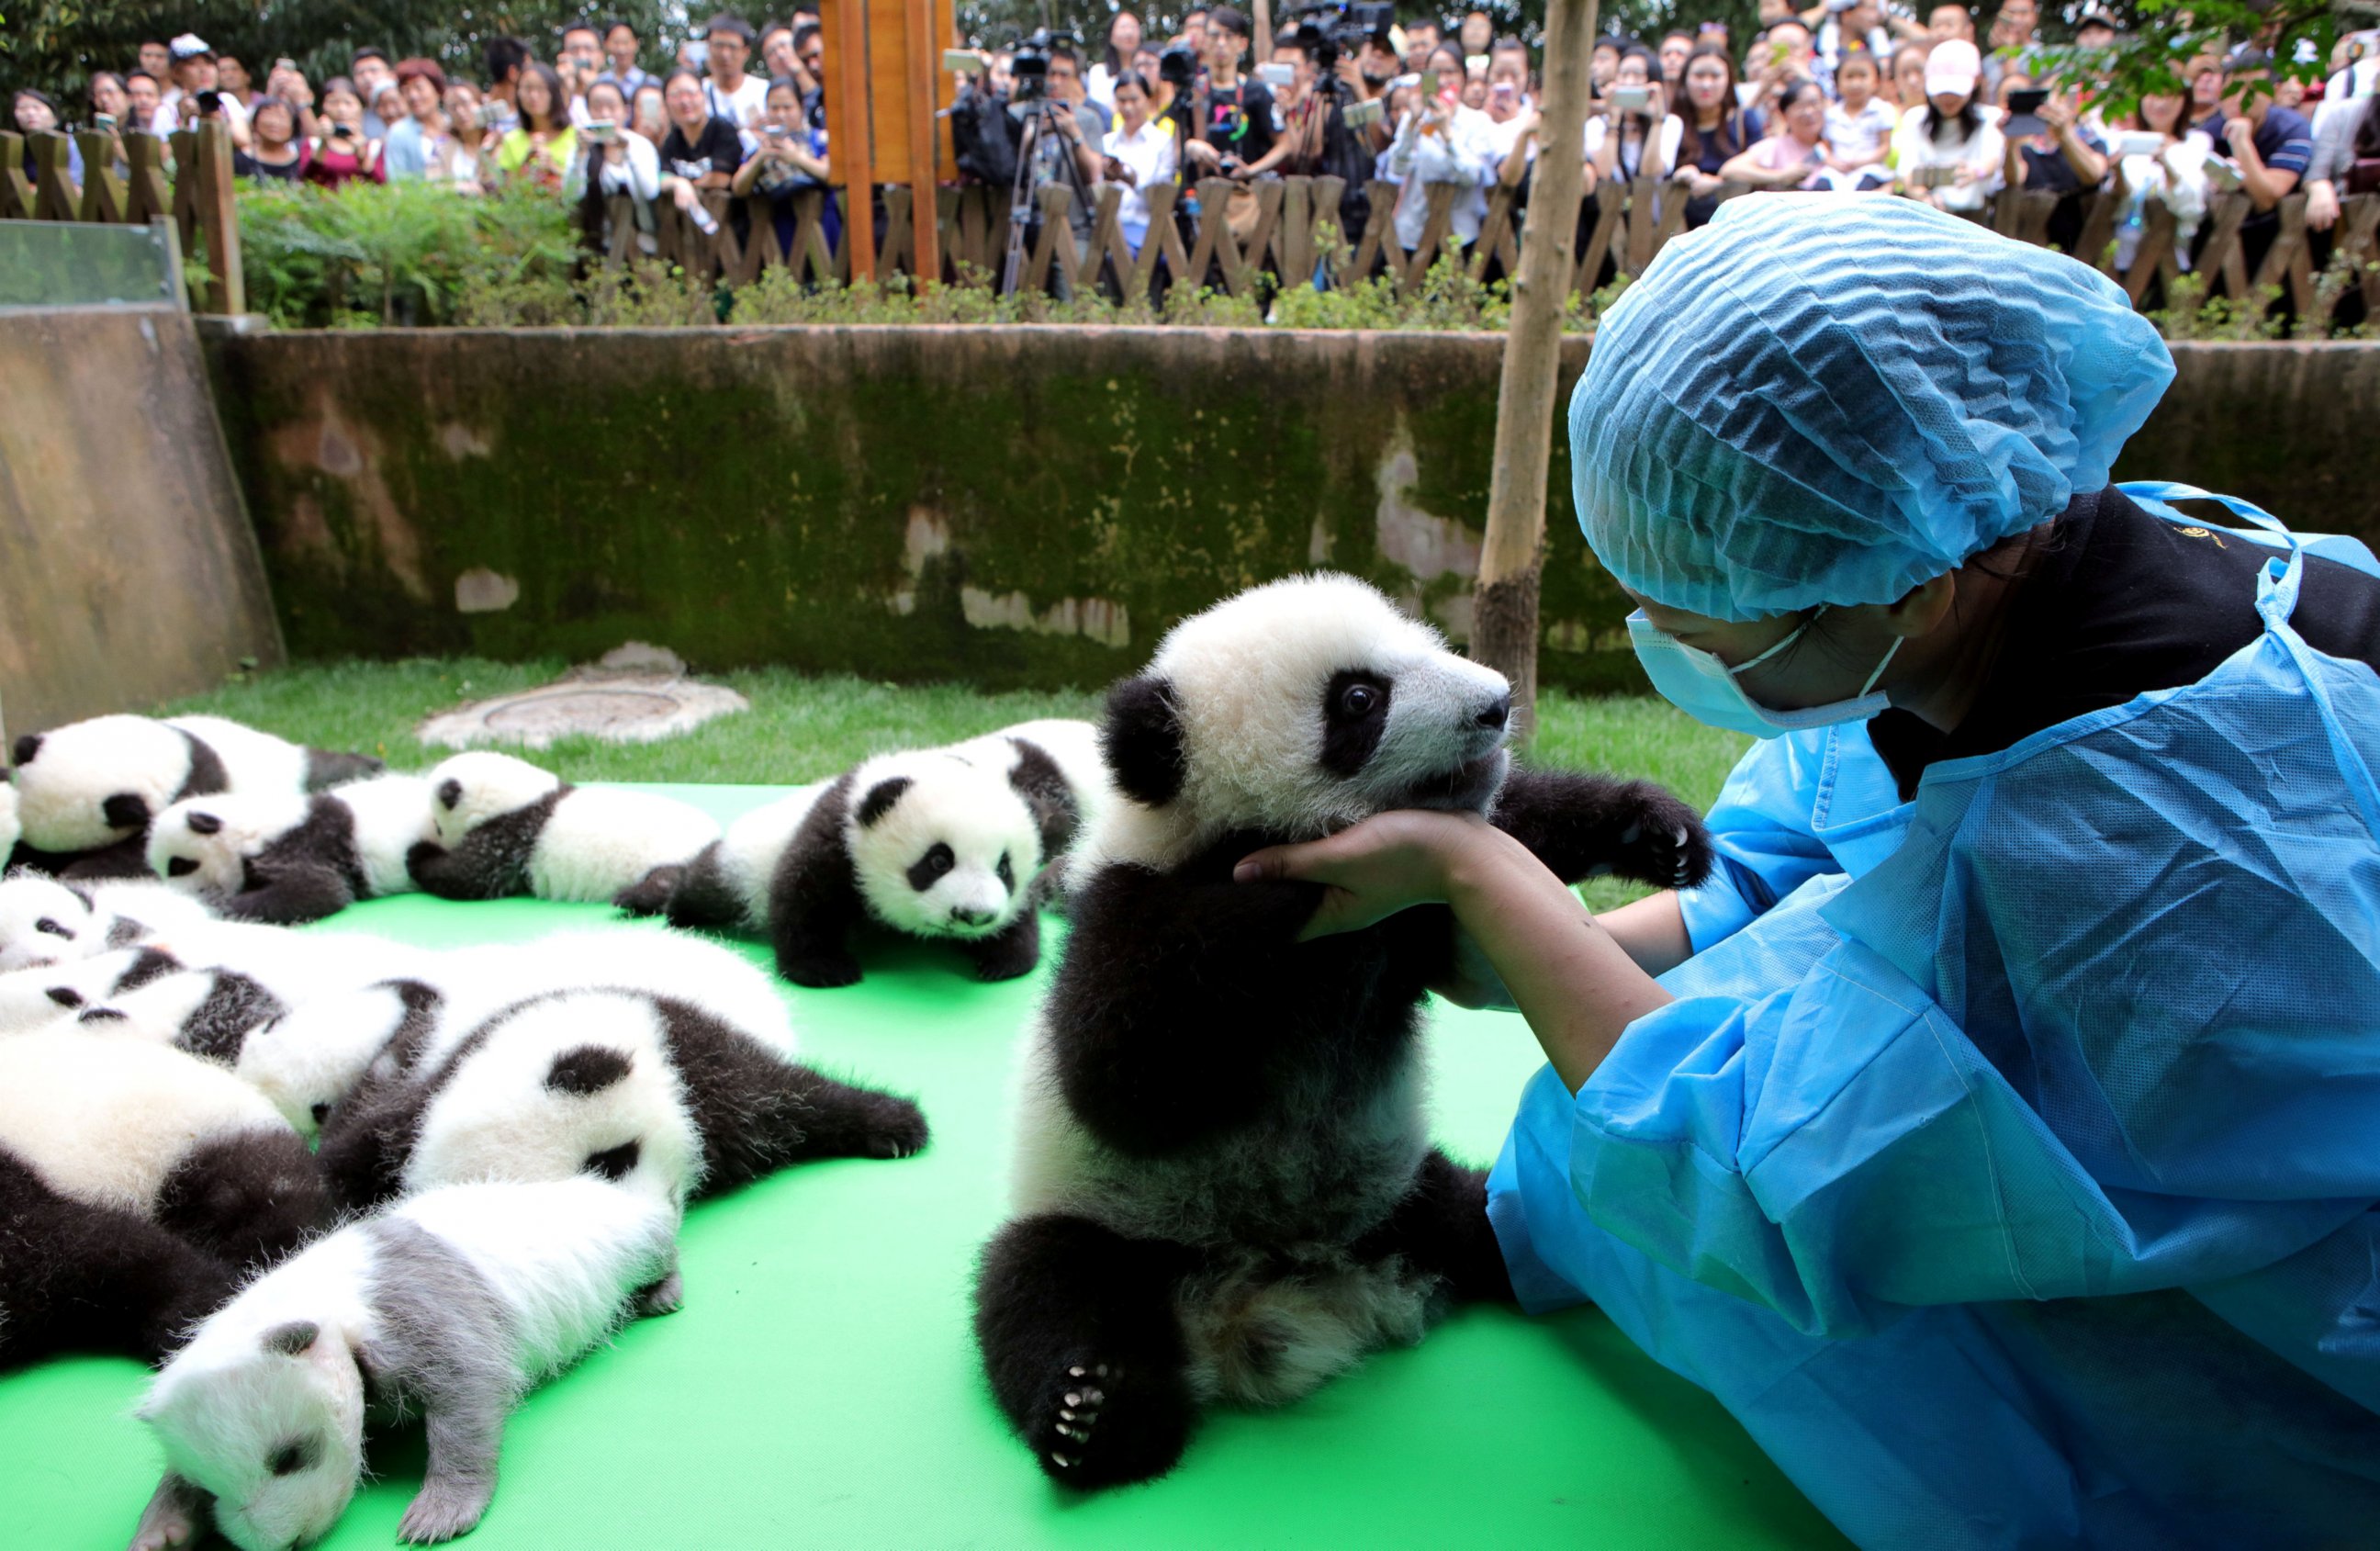 PHOTO: About 23 giant pandas born in 2016 are seen on a display at the Chengdu Research Base of Giant Panda Breeding in Chengdu, Sichuan province, China, Sept. 29, 2016.